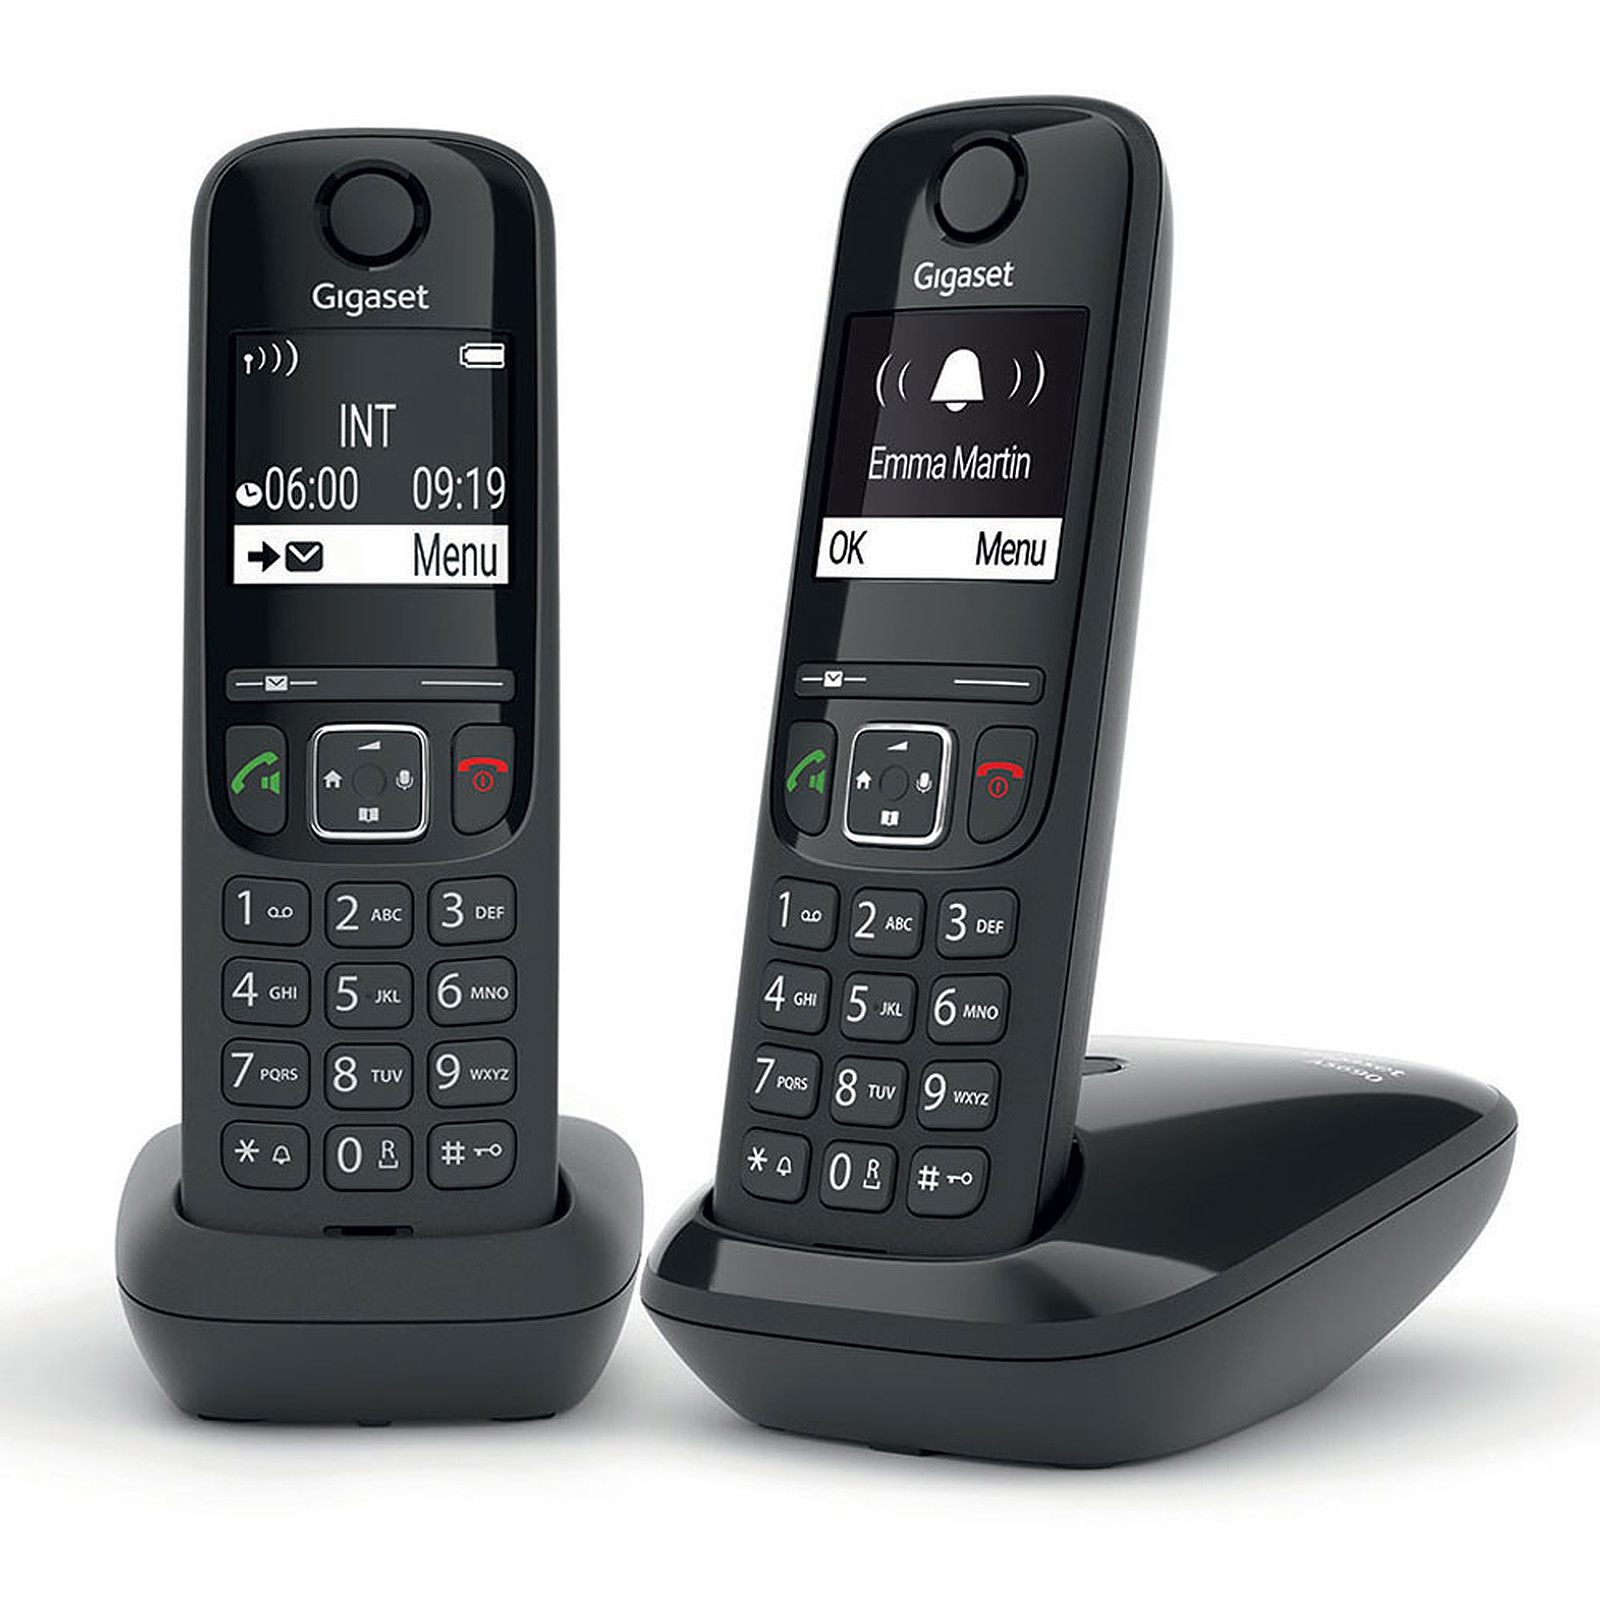 Gigaset AS690 Duo Noir · Occasion - Telephone sans fil Gigaset - Occasion